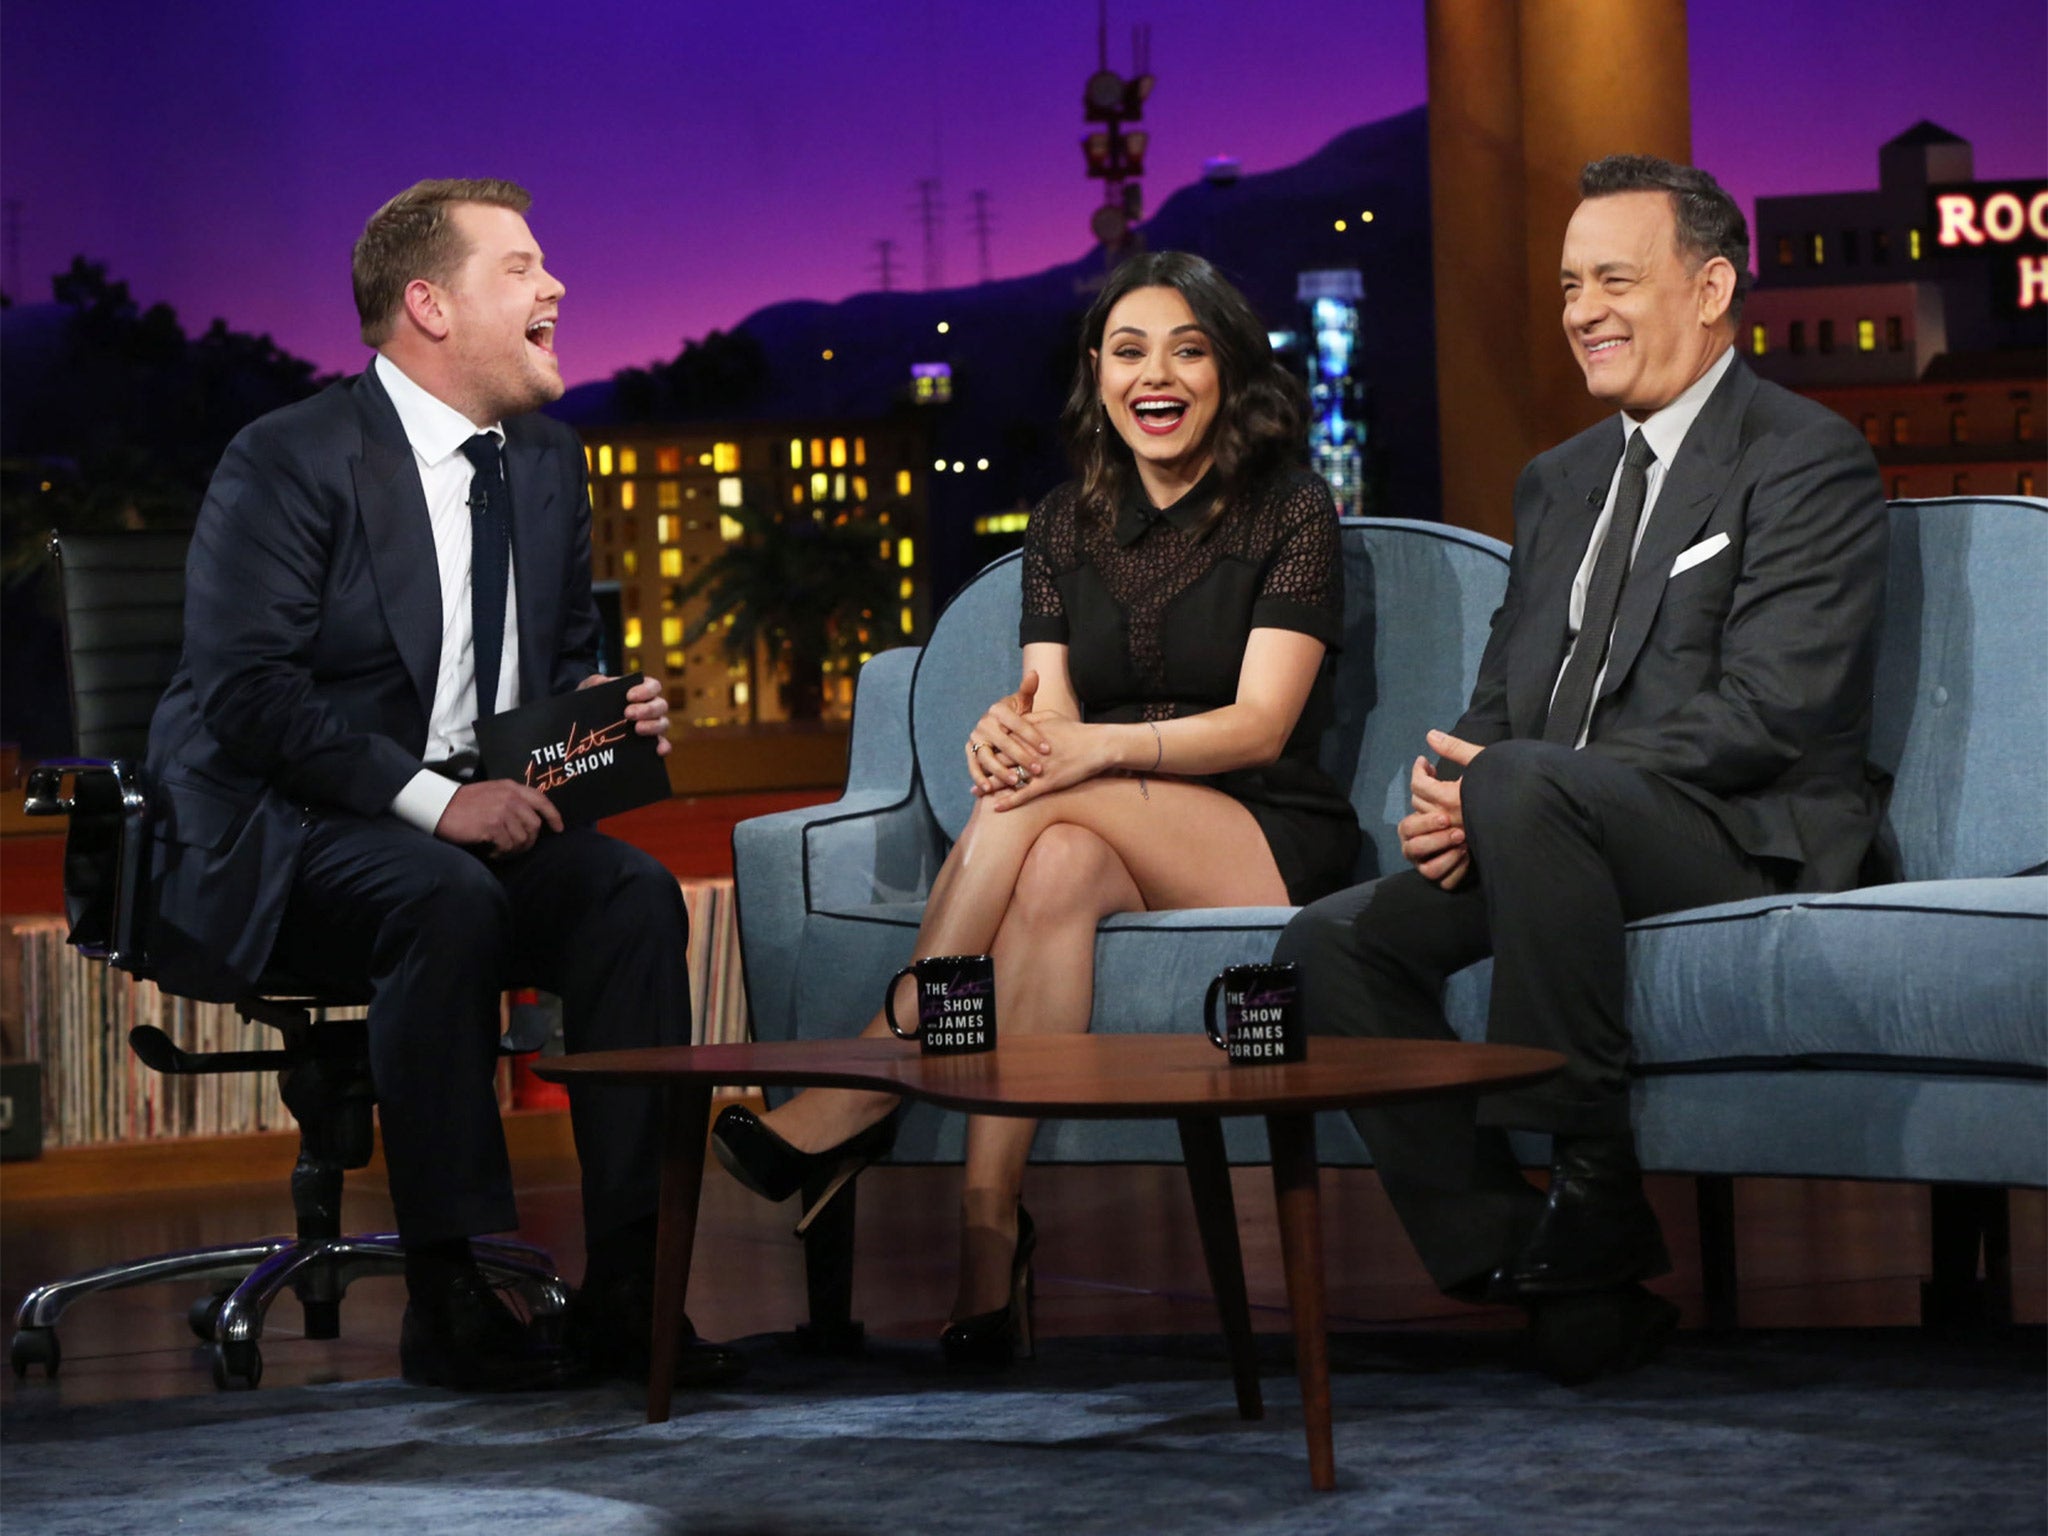 ‘The Late Late Show’ presenter James Corden is joined by Mila Kunis and Tom Hanks for his first night as host